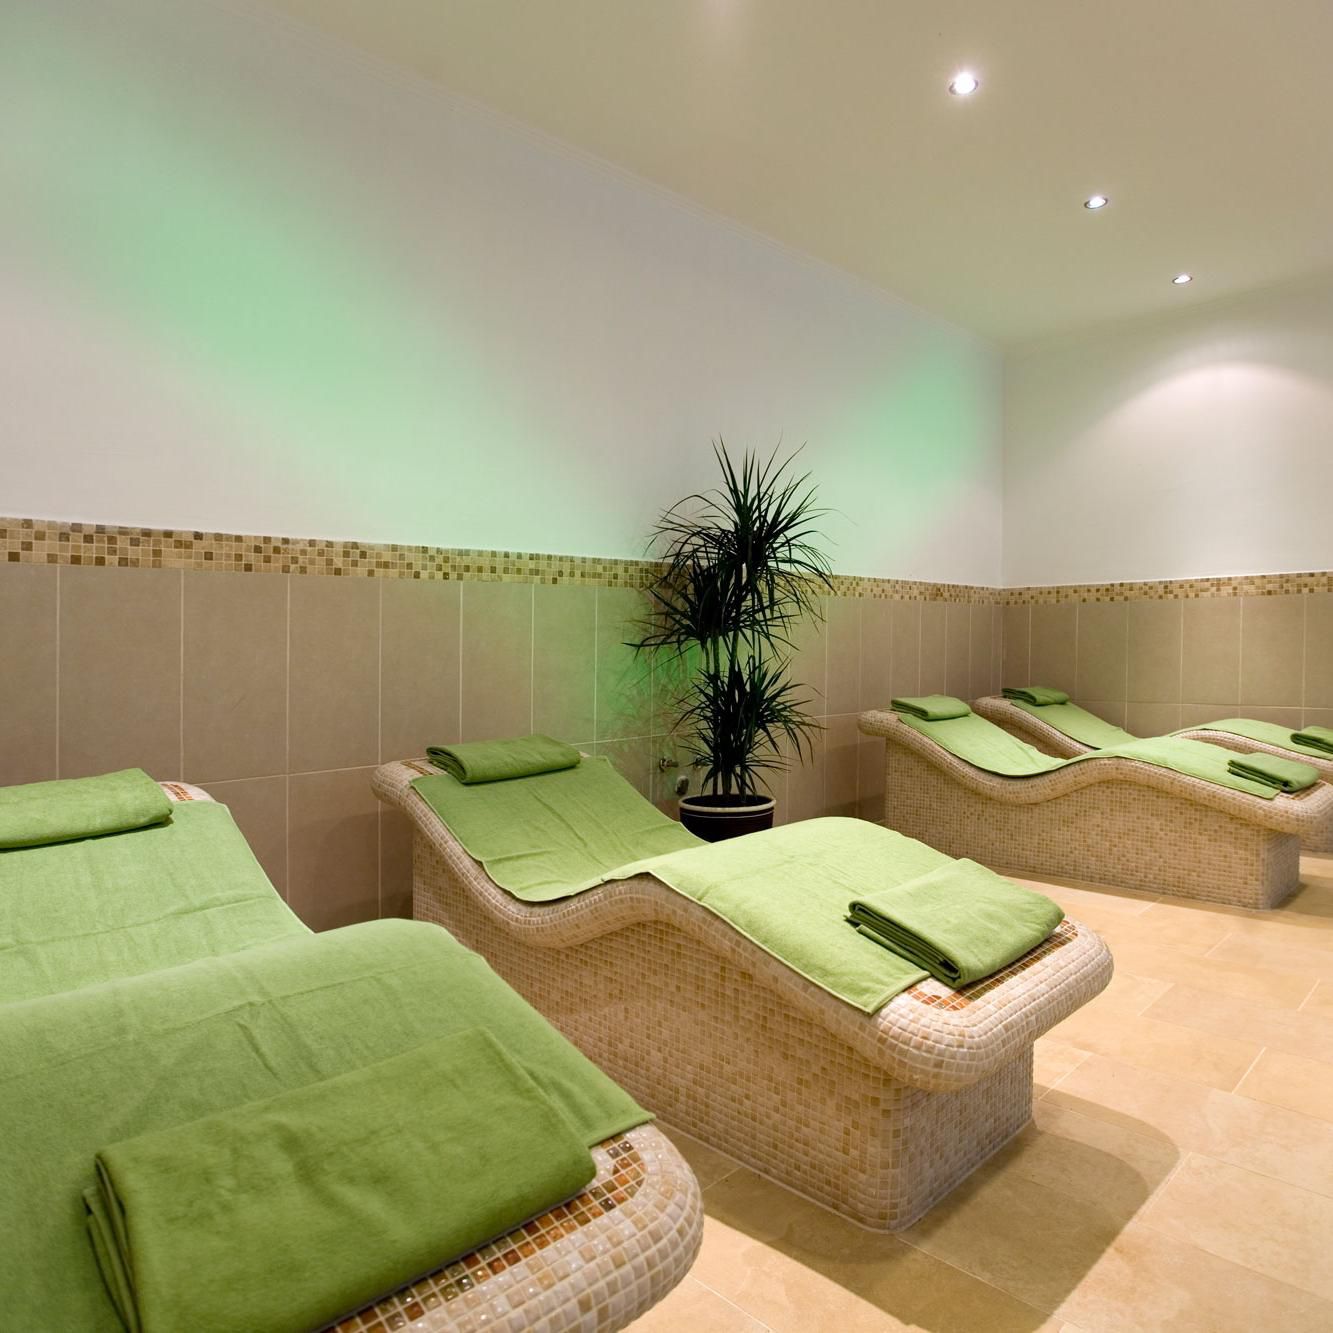 Hotel Spa centers are the perfect place to release stress